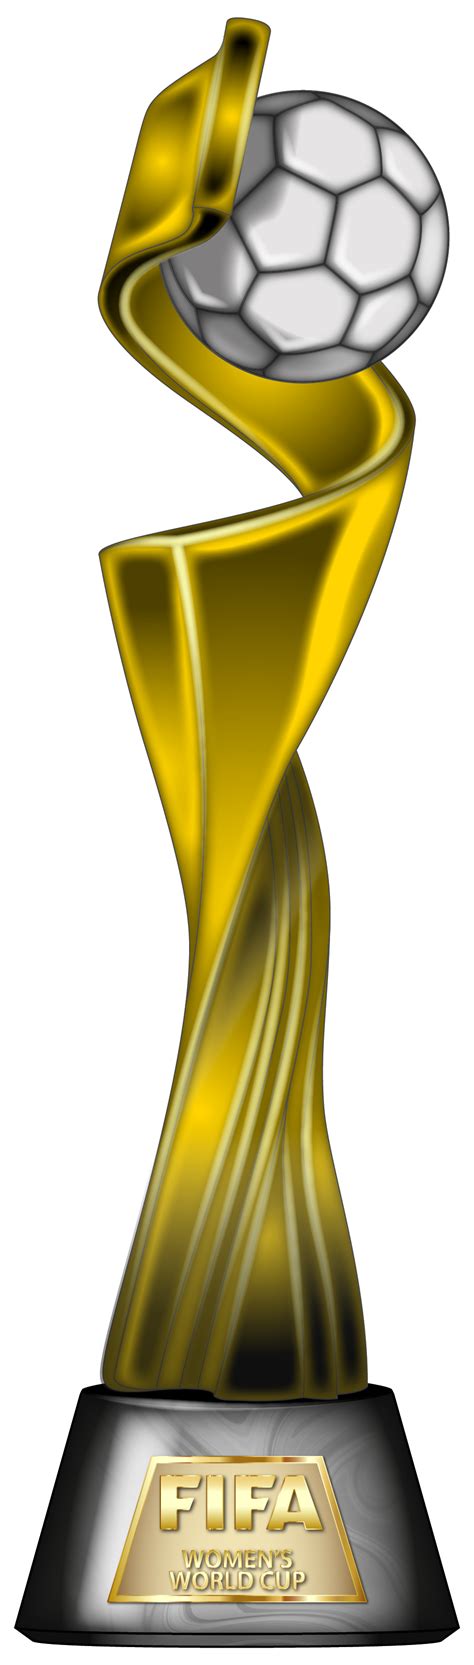 Trophy Fifa Womens World Cup World Cup Trophy Fifa Womens World